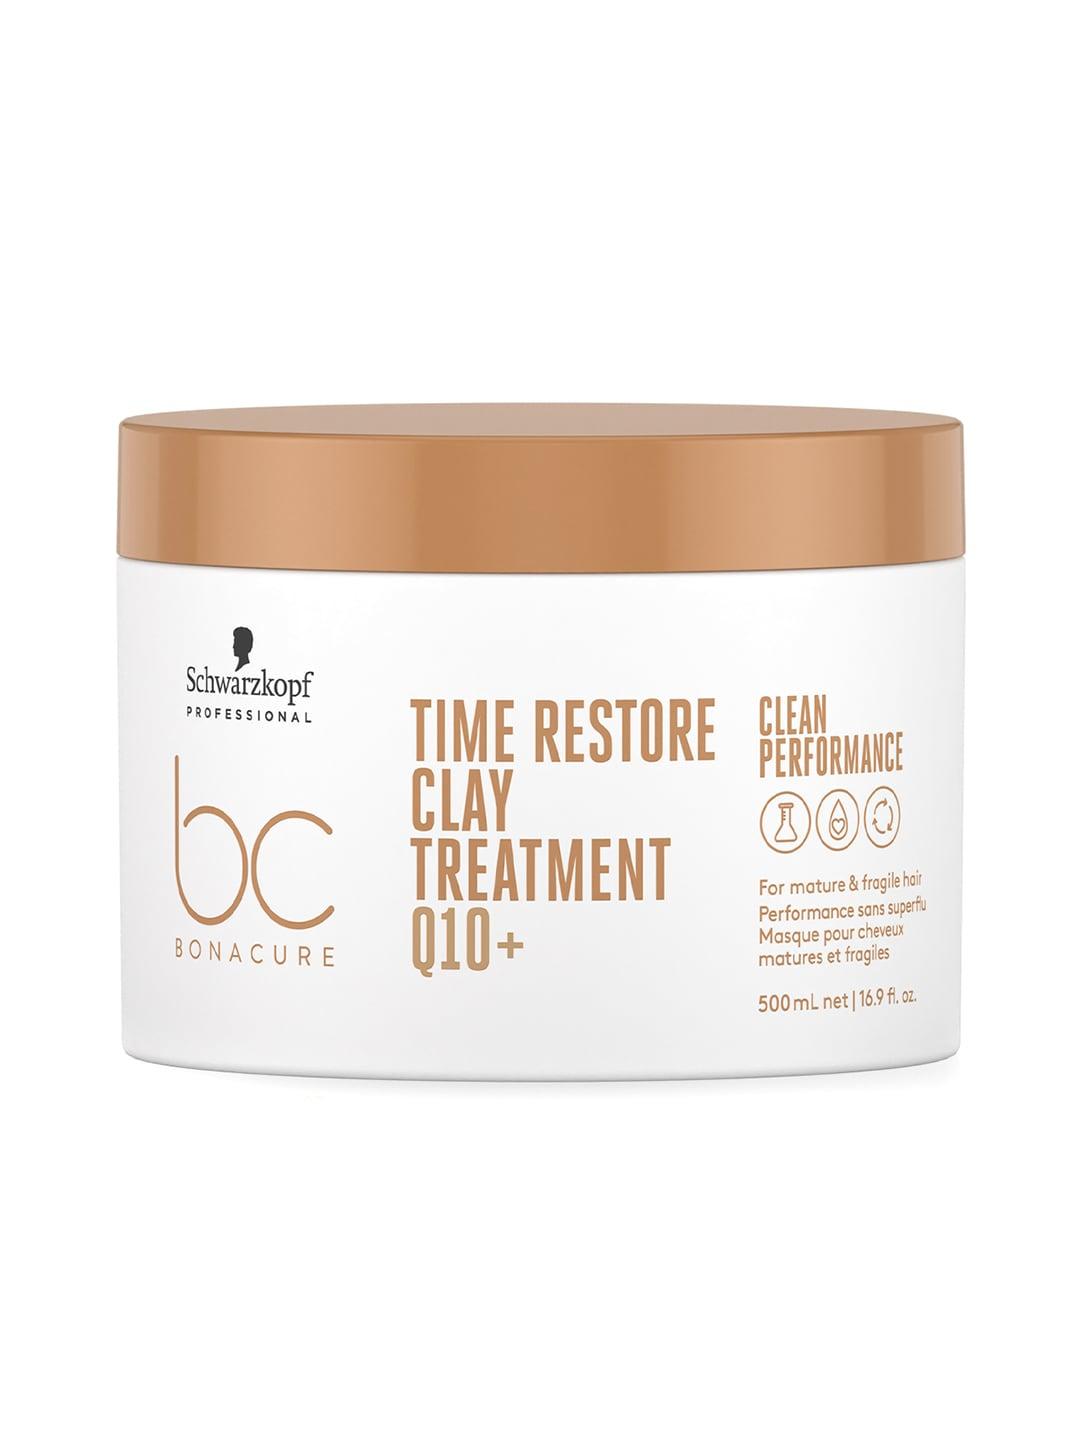 Schwarzkopf PROFESSIONAL Bonacure Time Restore Clay Hair Mask with Q10+ - 500ml